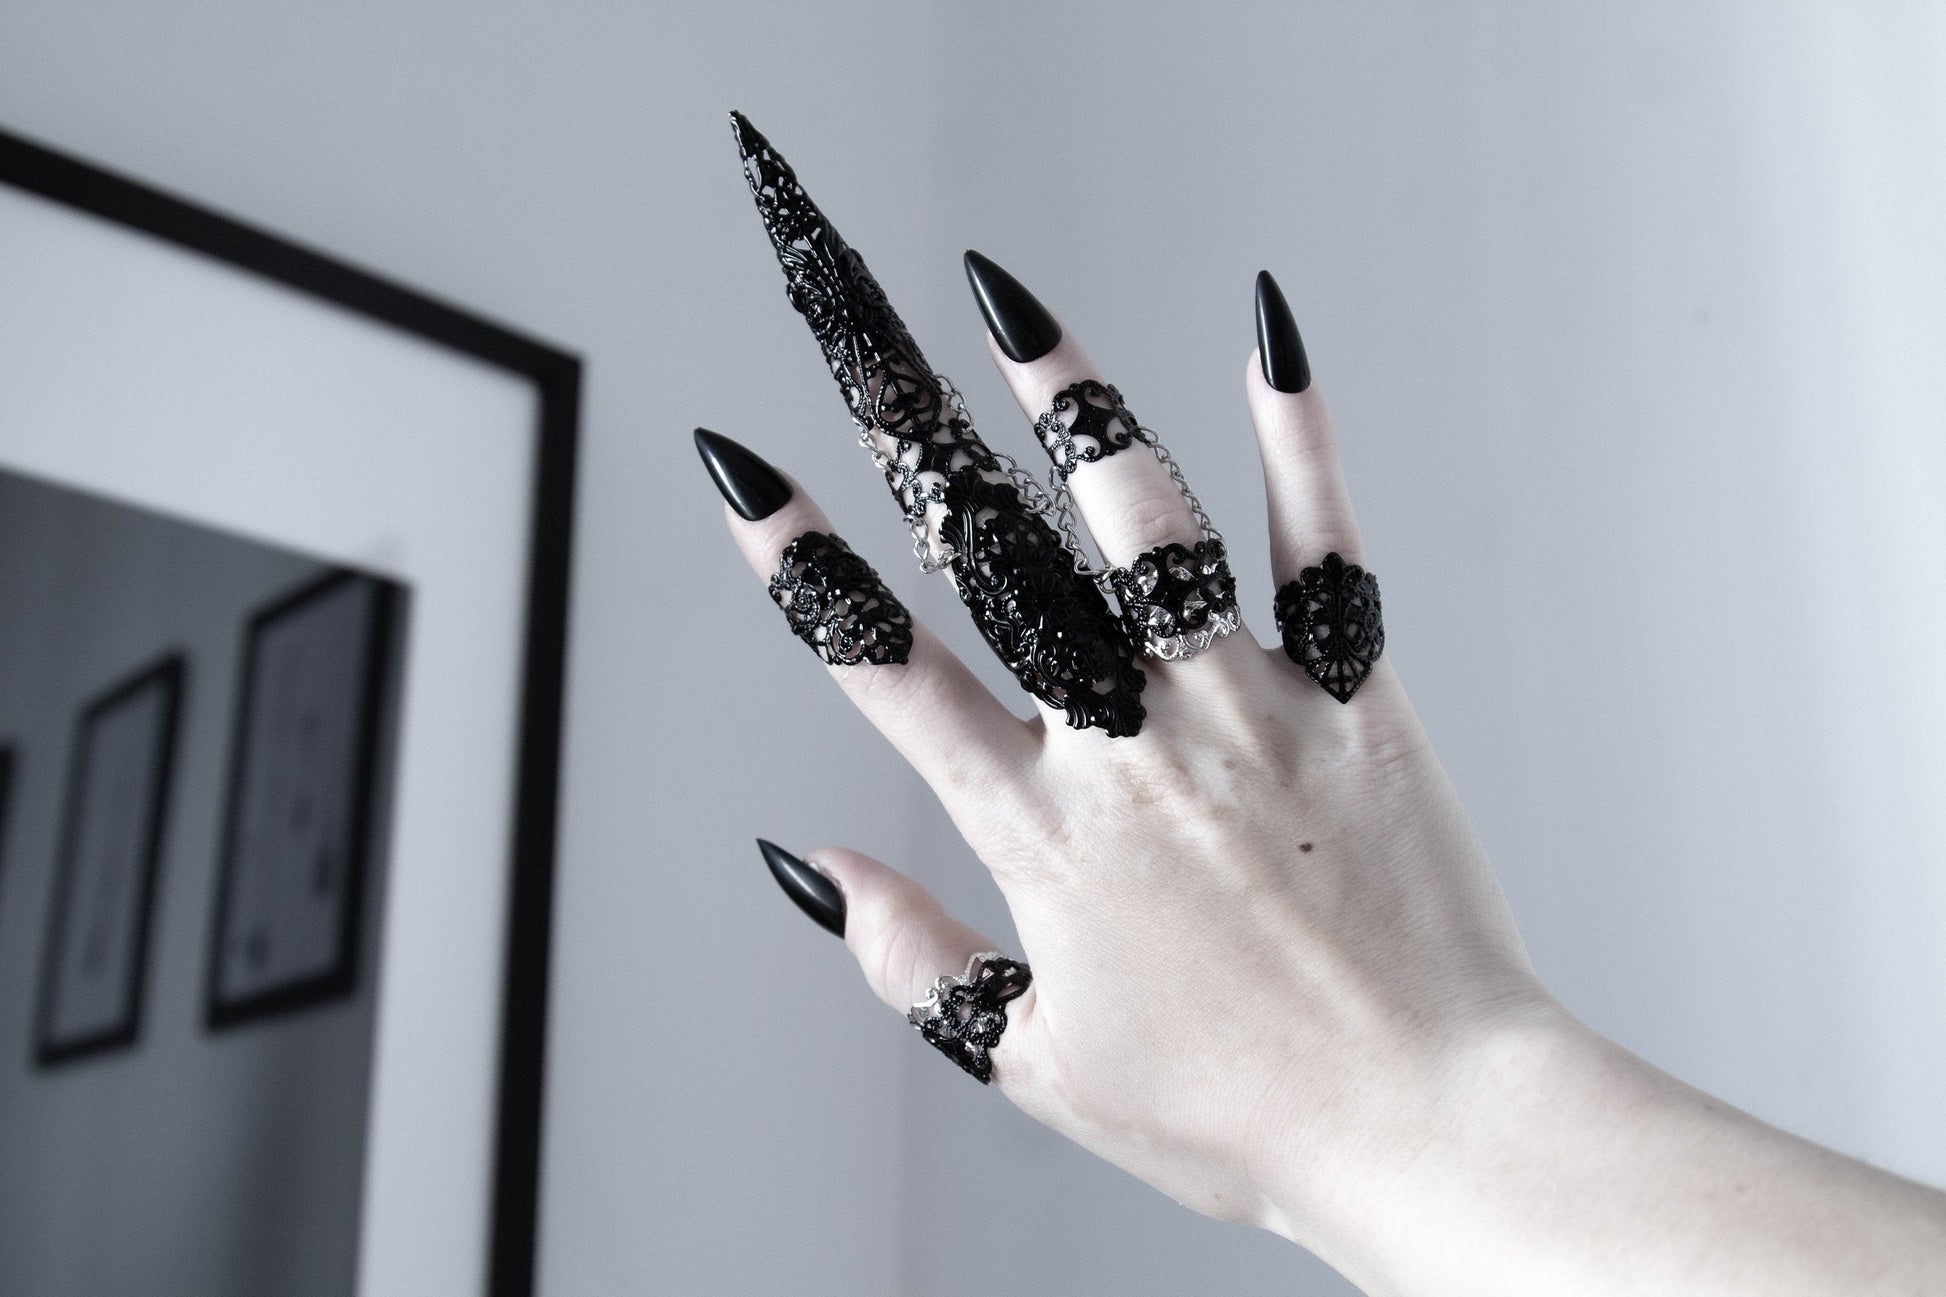 Hand adorned with Myril Jewels' neo-goth rings, showcasing intricate black filigree designs perfect for Halloween or everyday gothic-chic. A bold statement for festival wear or a unique goth girlfriend gift, embodying the dark-avantgarde spirit.